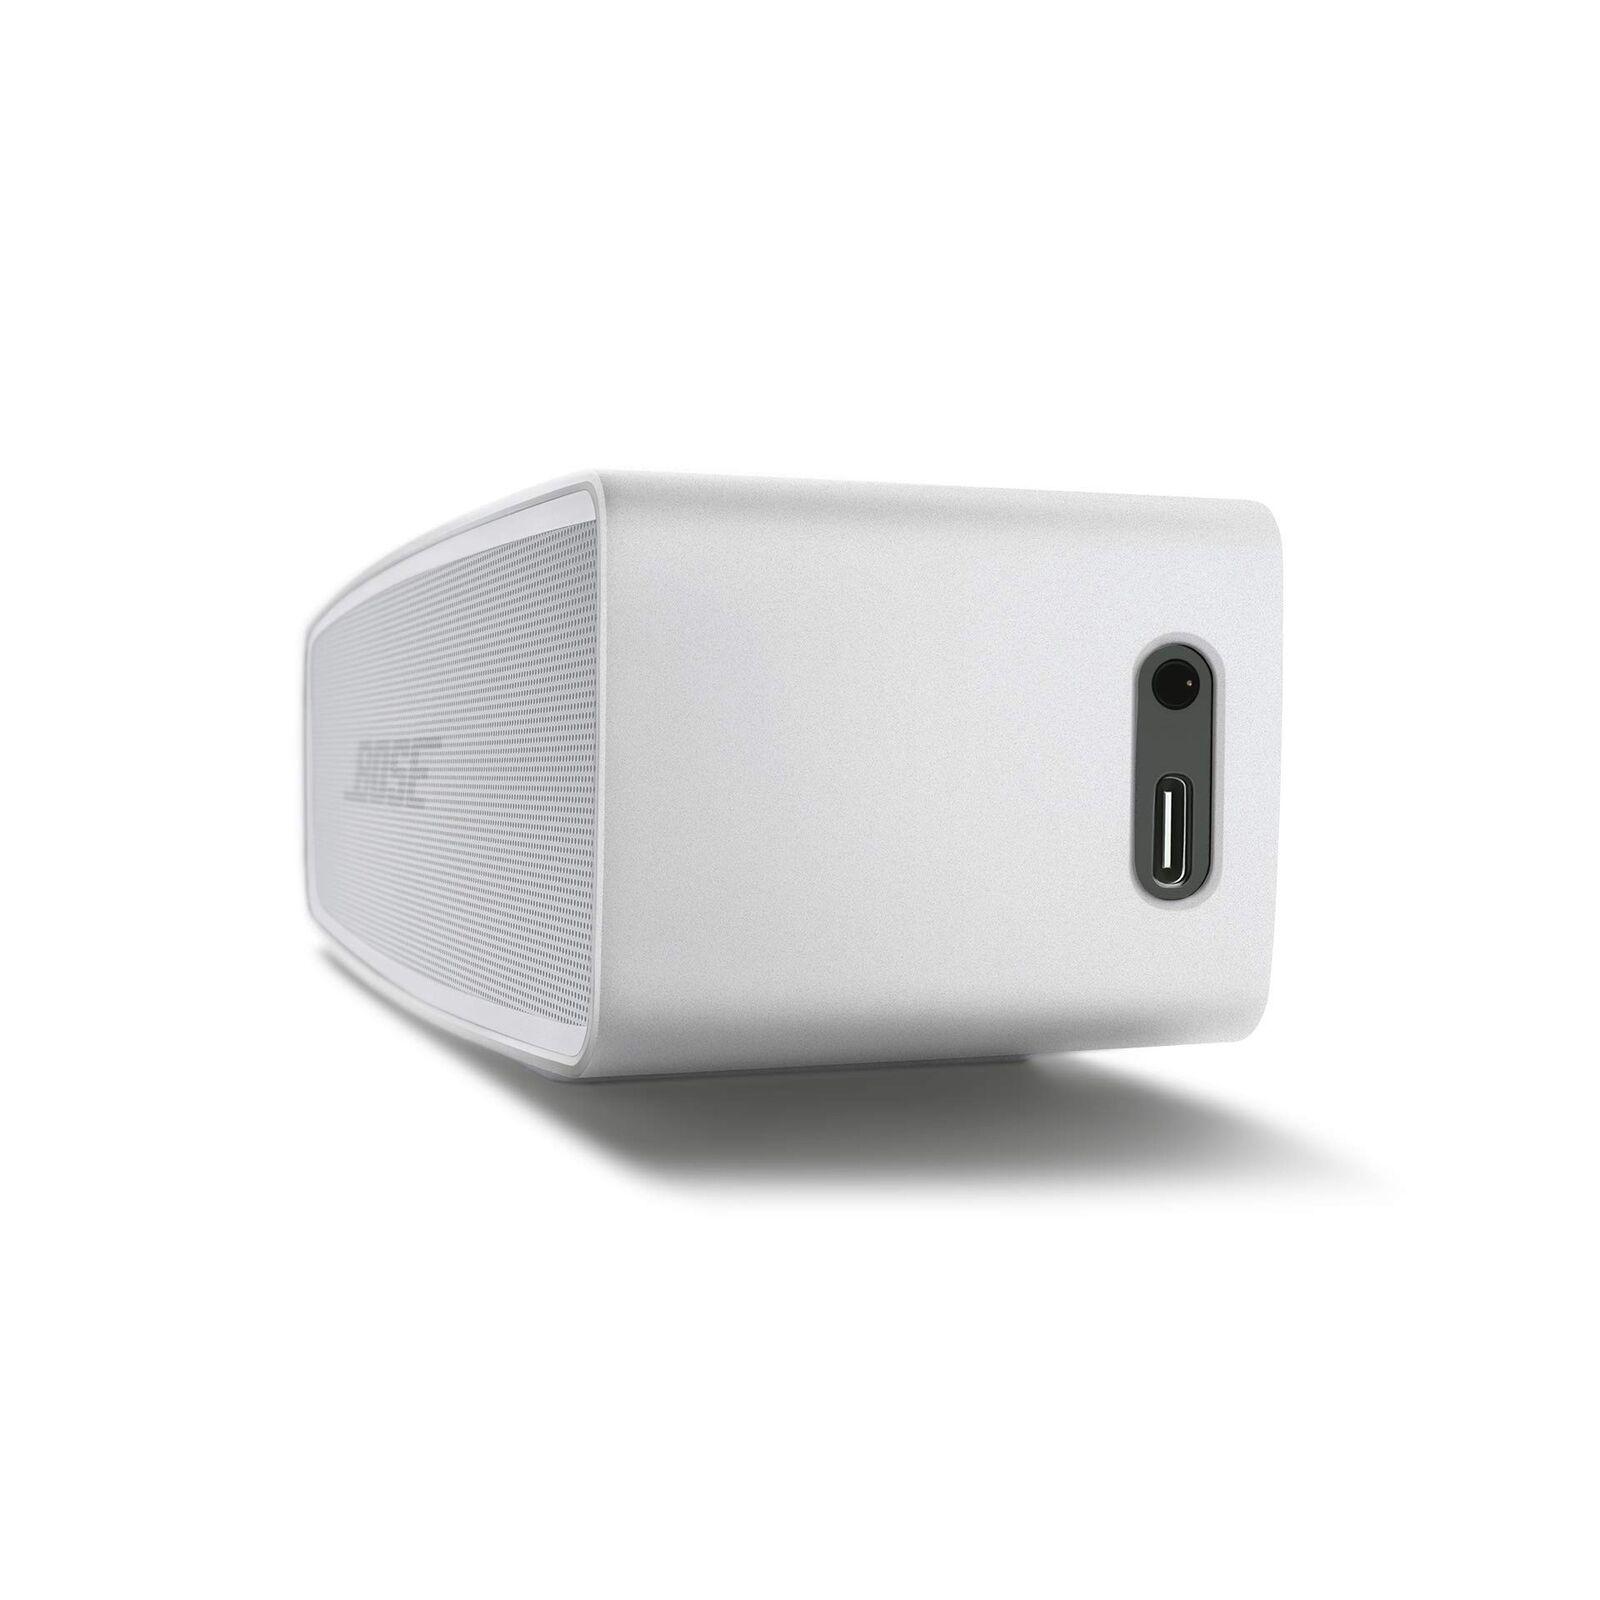 Bose Soundlink Mini | Batteries, USB-C, Lithium Speaker Edition, Polymer AUX, 3.5mm Luxe Silver II 1 Special Bluetooth